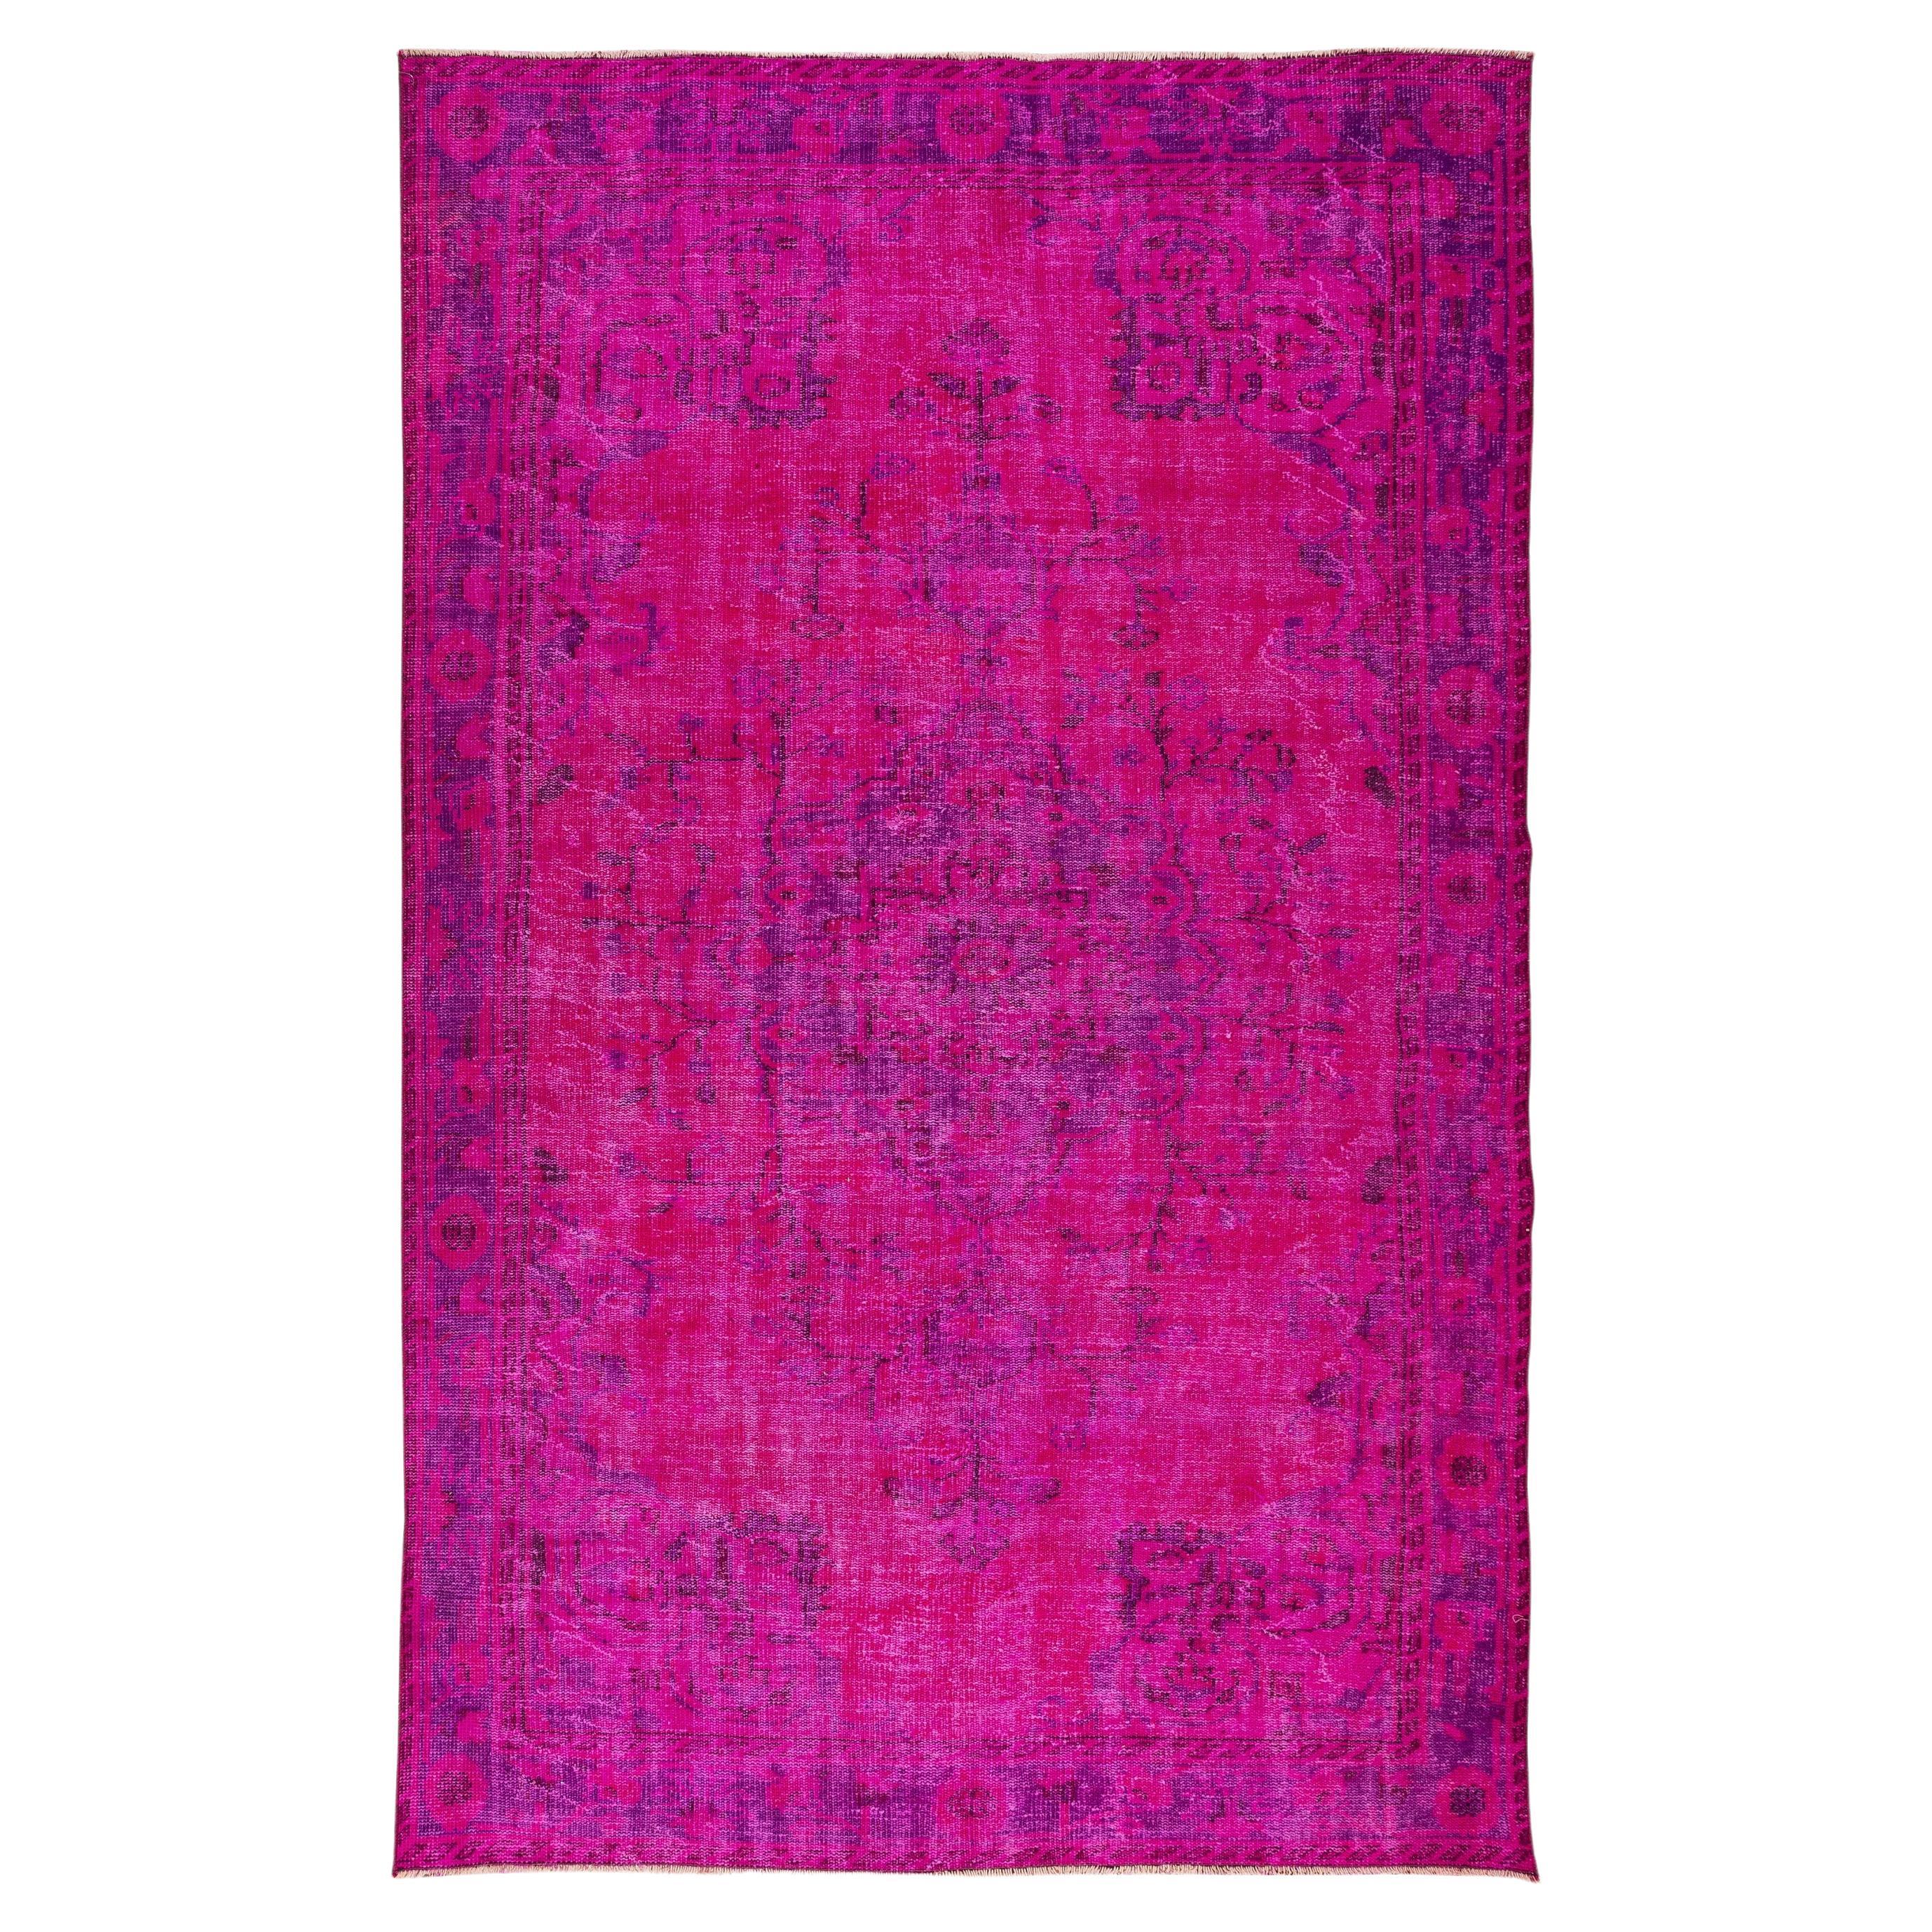 Turkish Handmade Vintage Rug Re-Dyed in Hot Pink 4 Modern Interiors For Sale